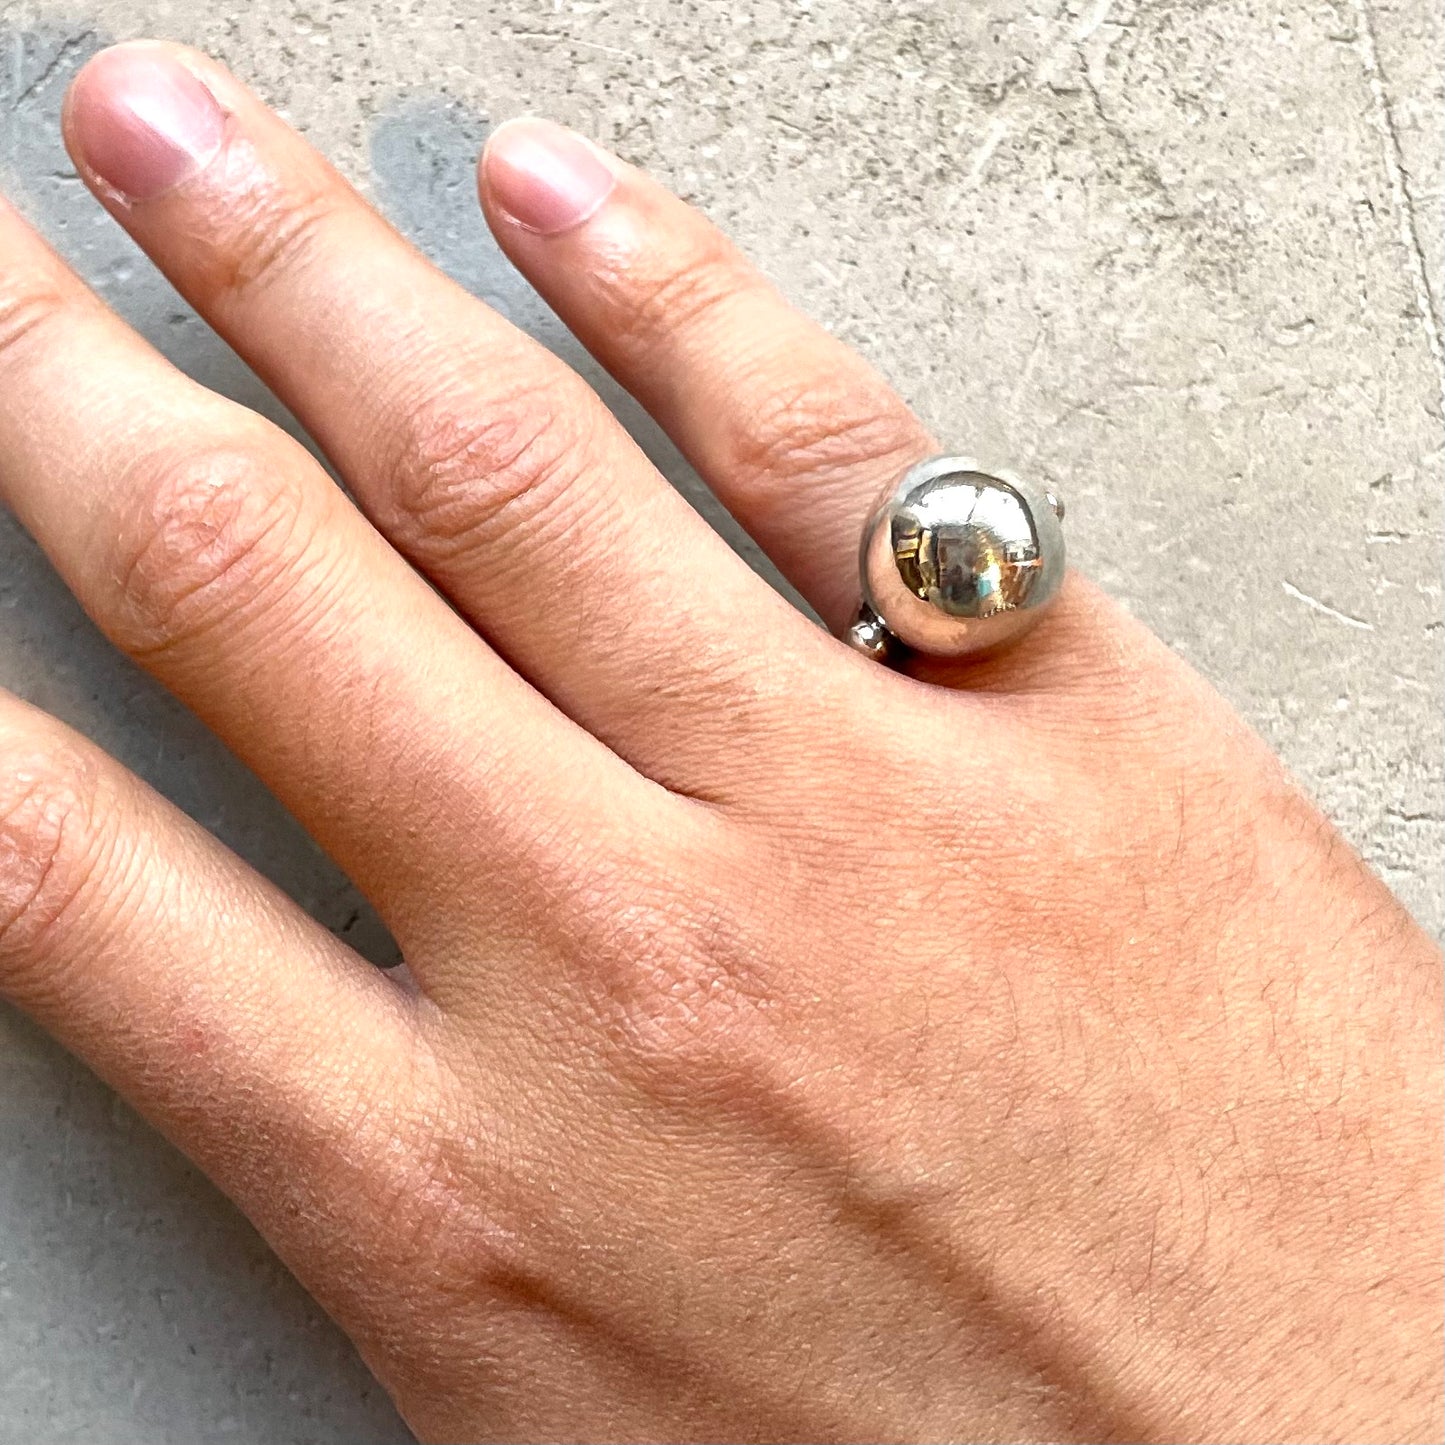 【 FRENCH GARMENTS 】ANTOMICA BASQUE RING